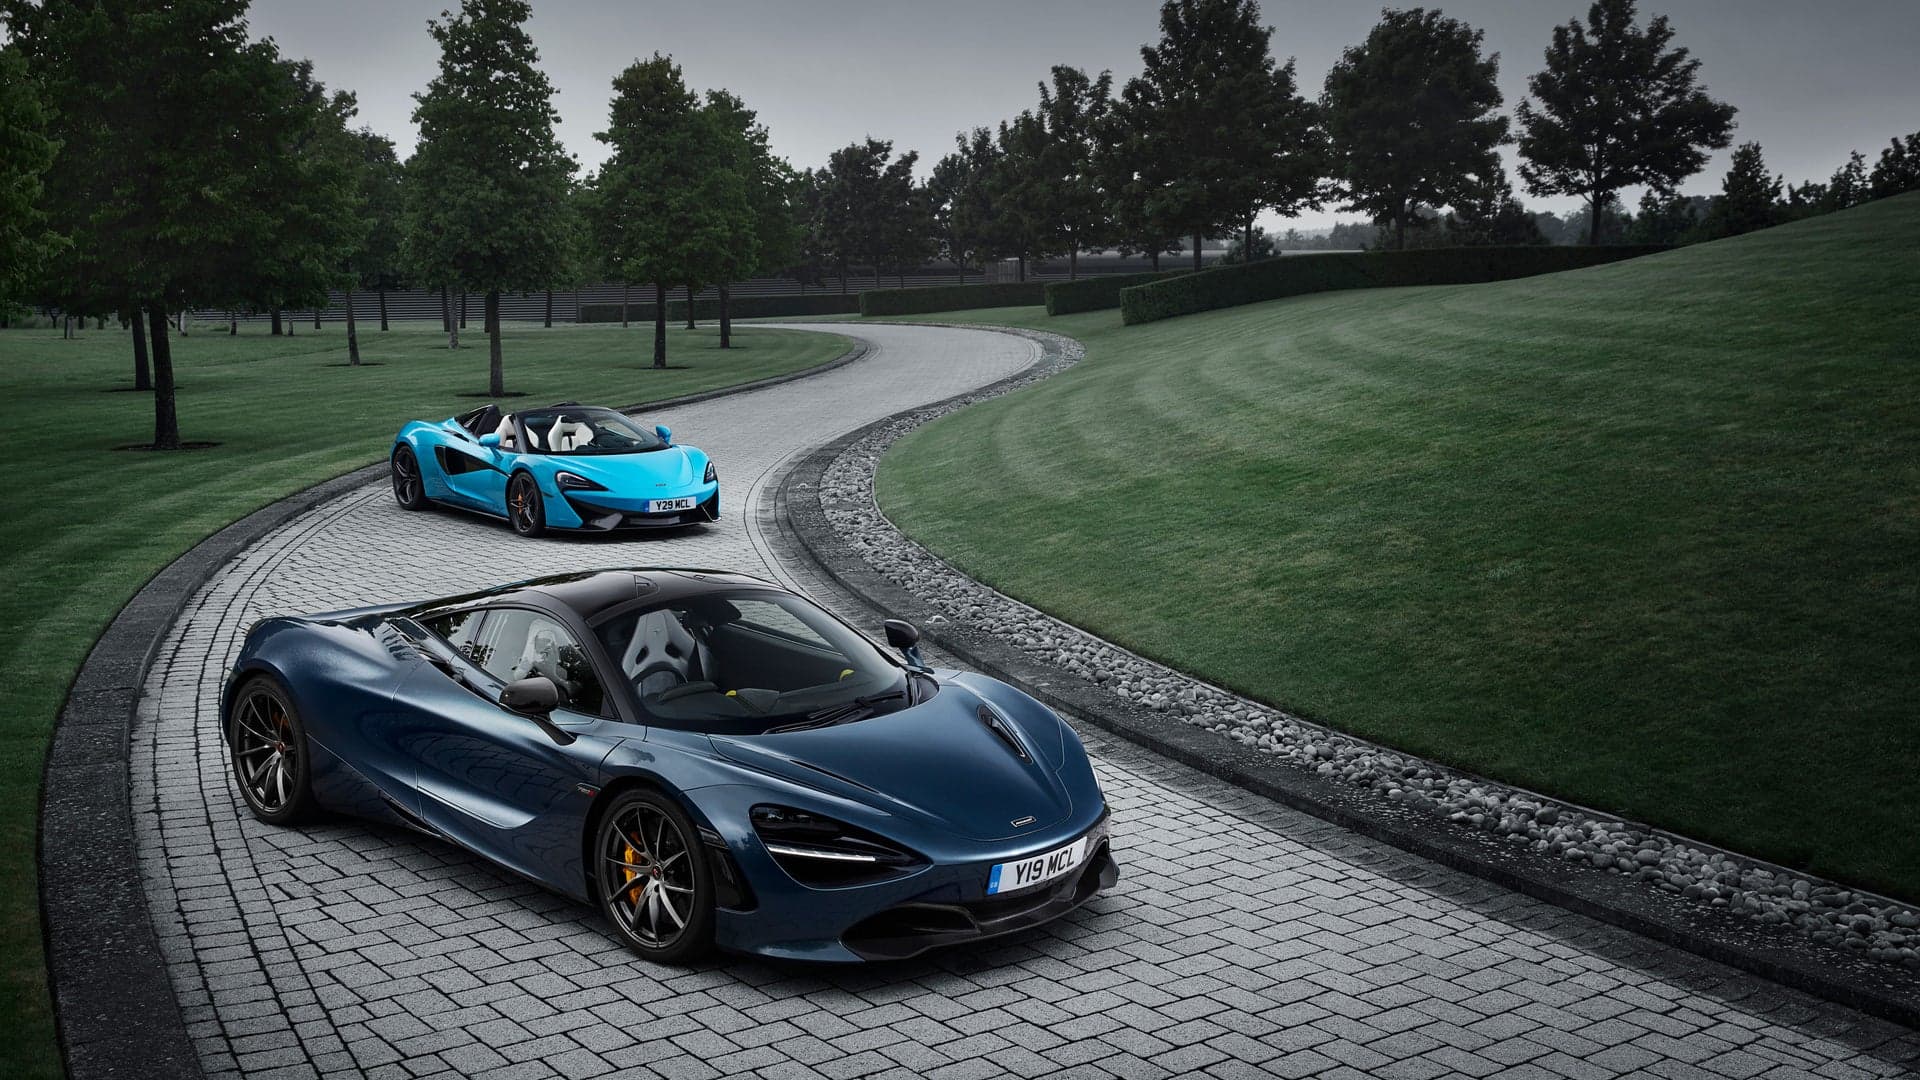 McLaren Arrives in Force in Frankfurt with a Ton of Supercars for Test Drives